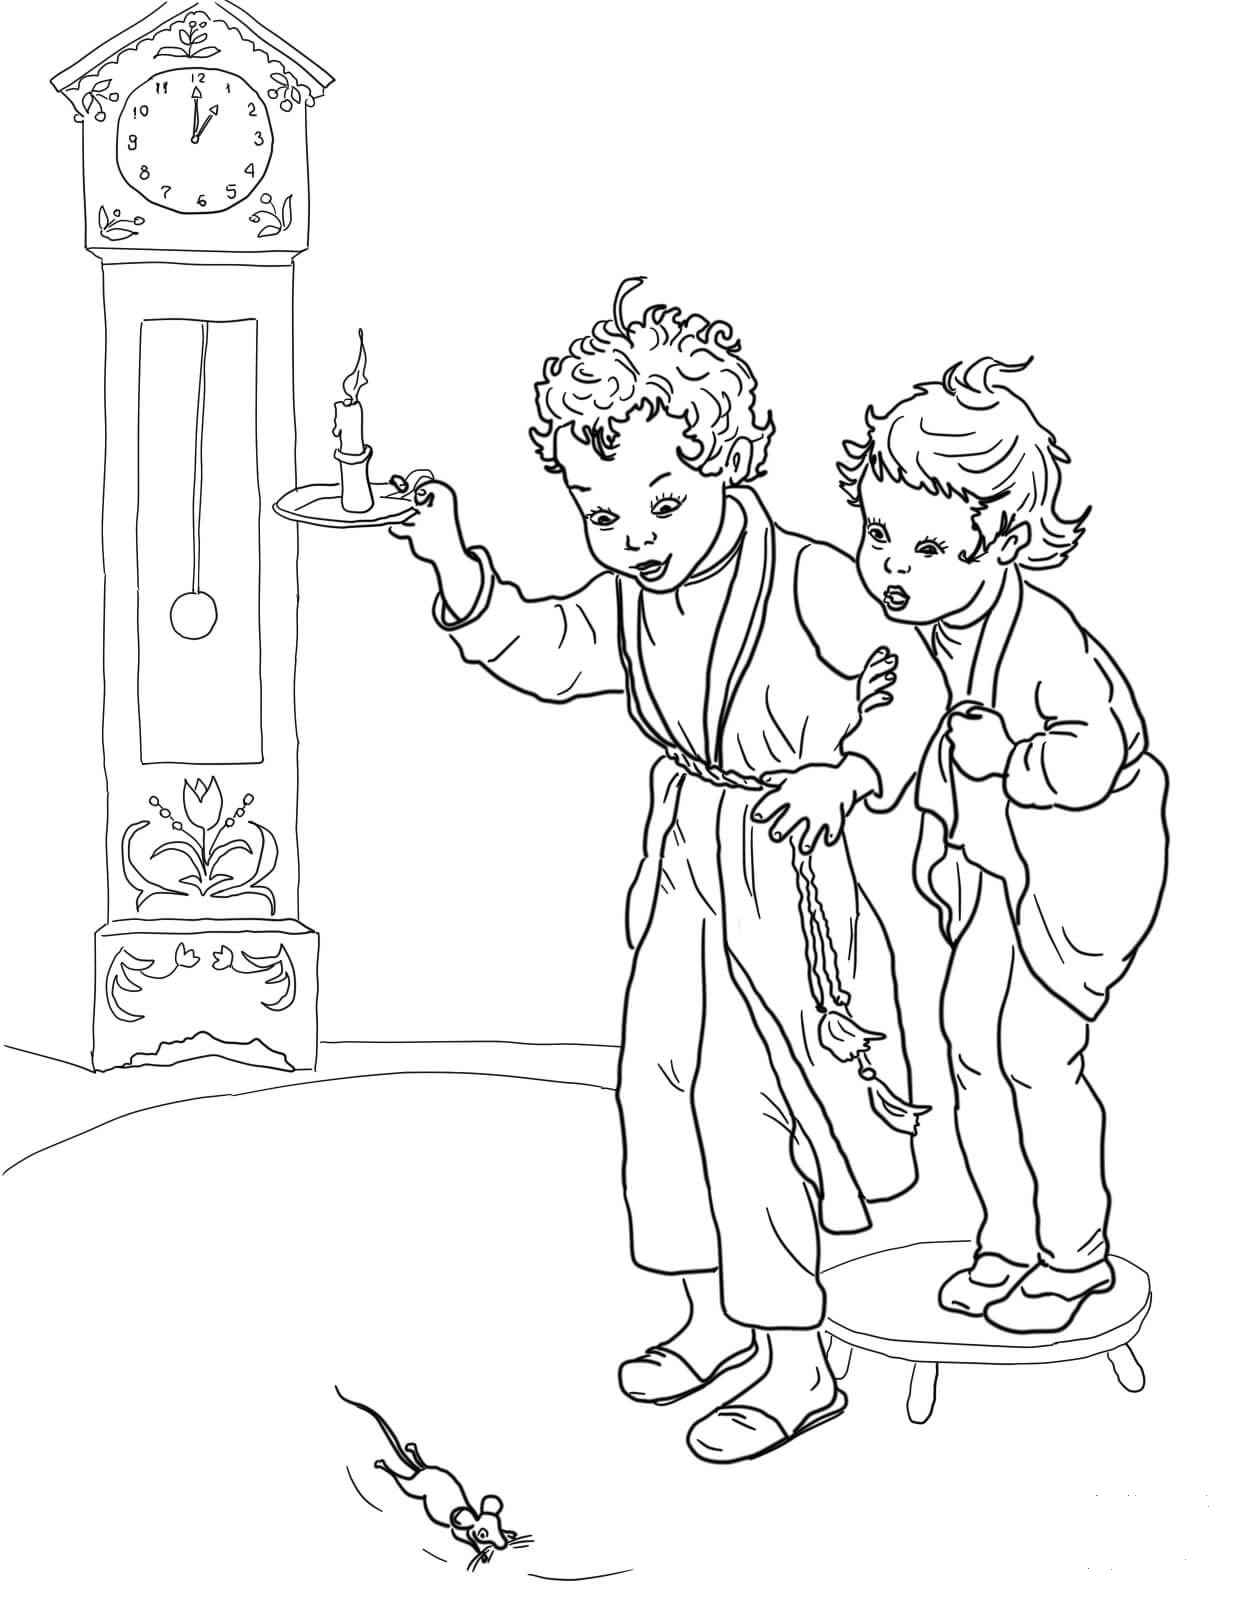 Hickory Dickory Dock Coloring Page Colouringpages